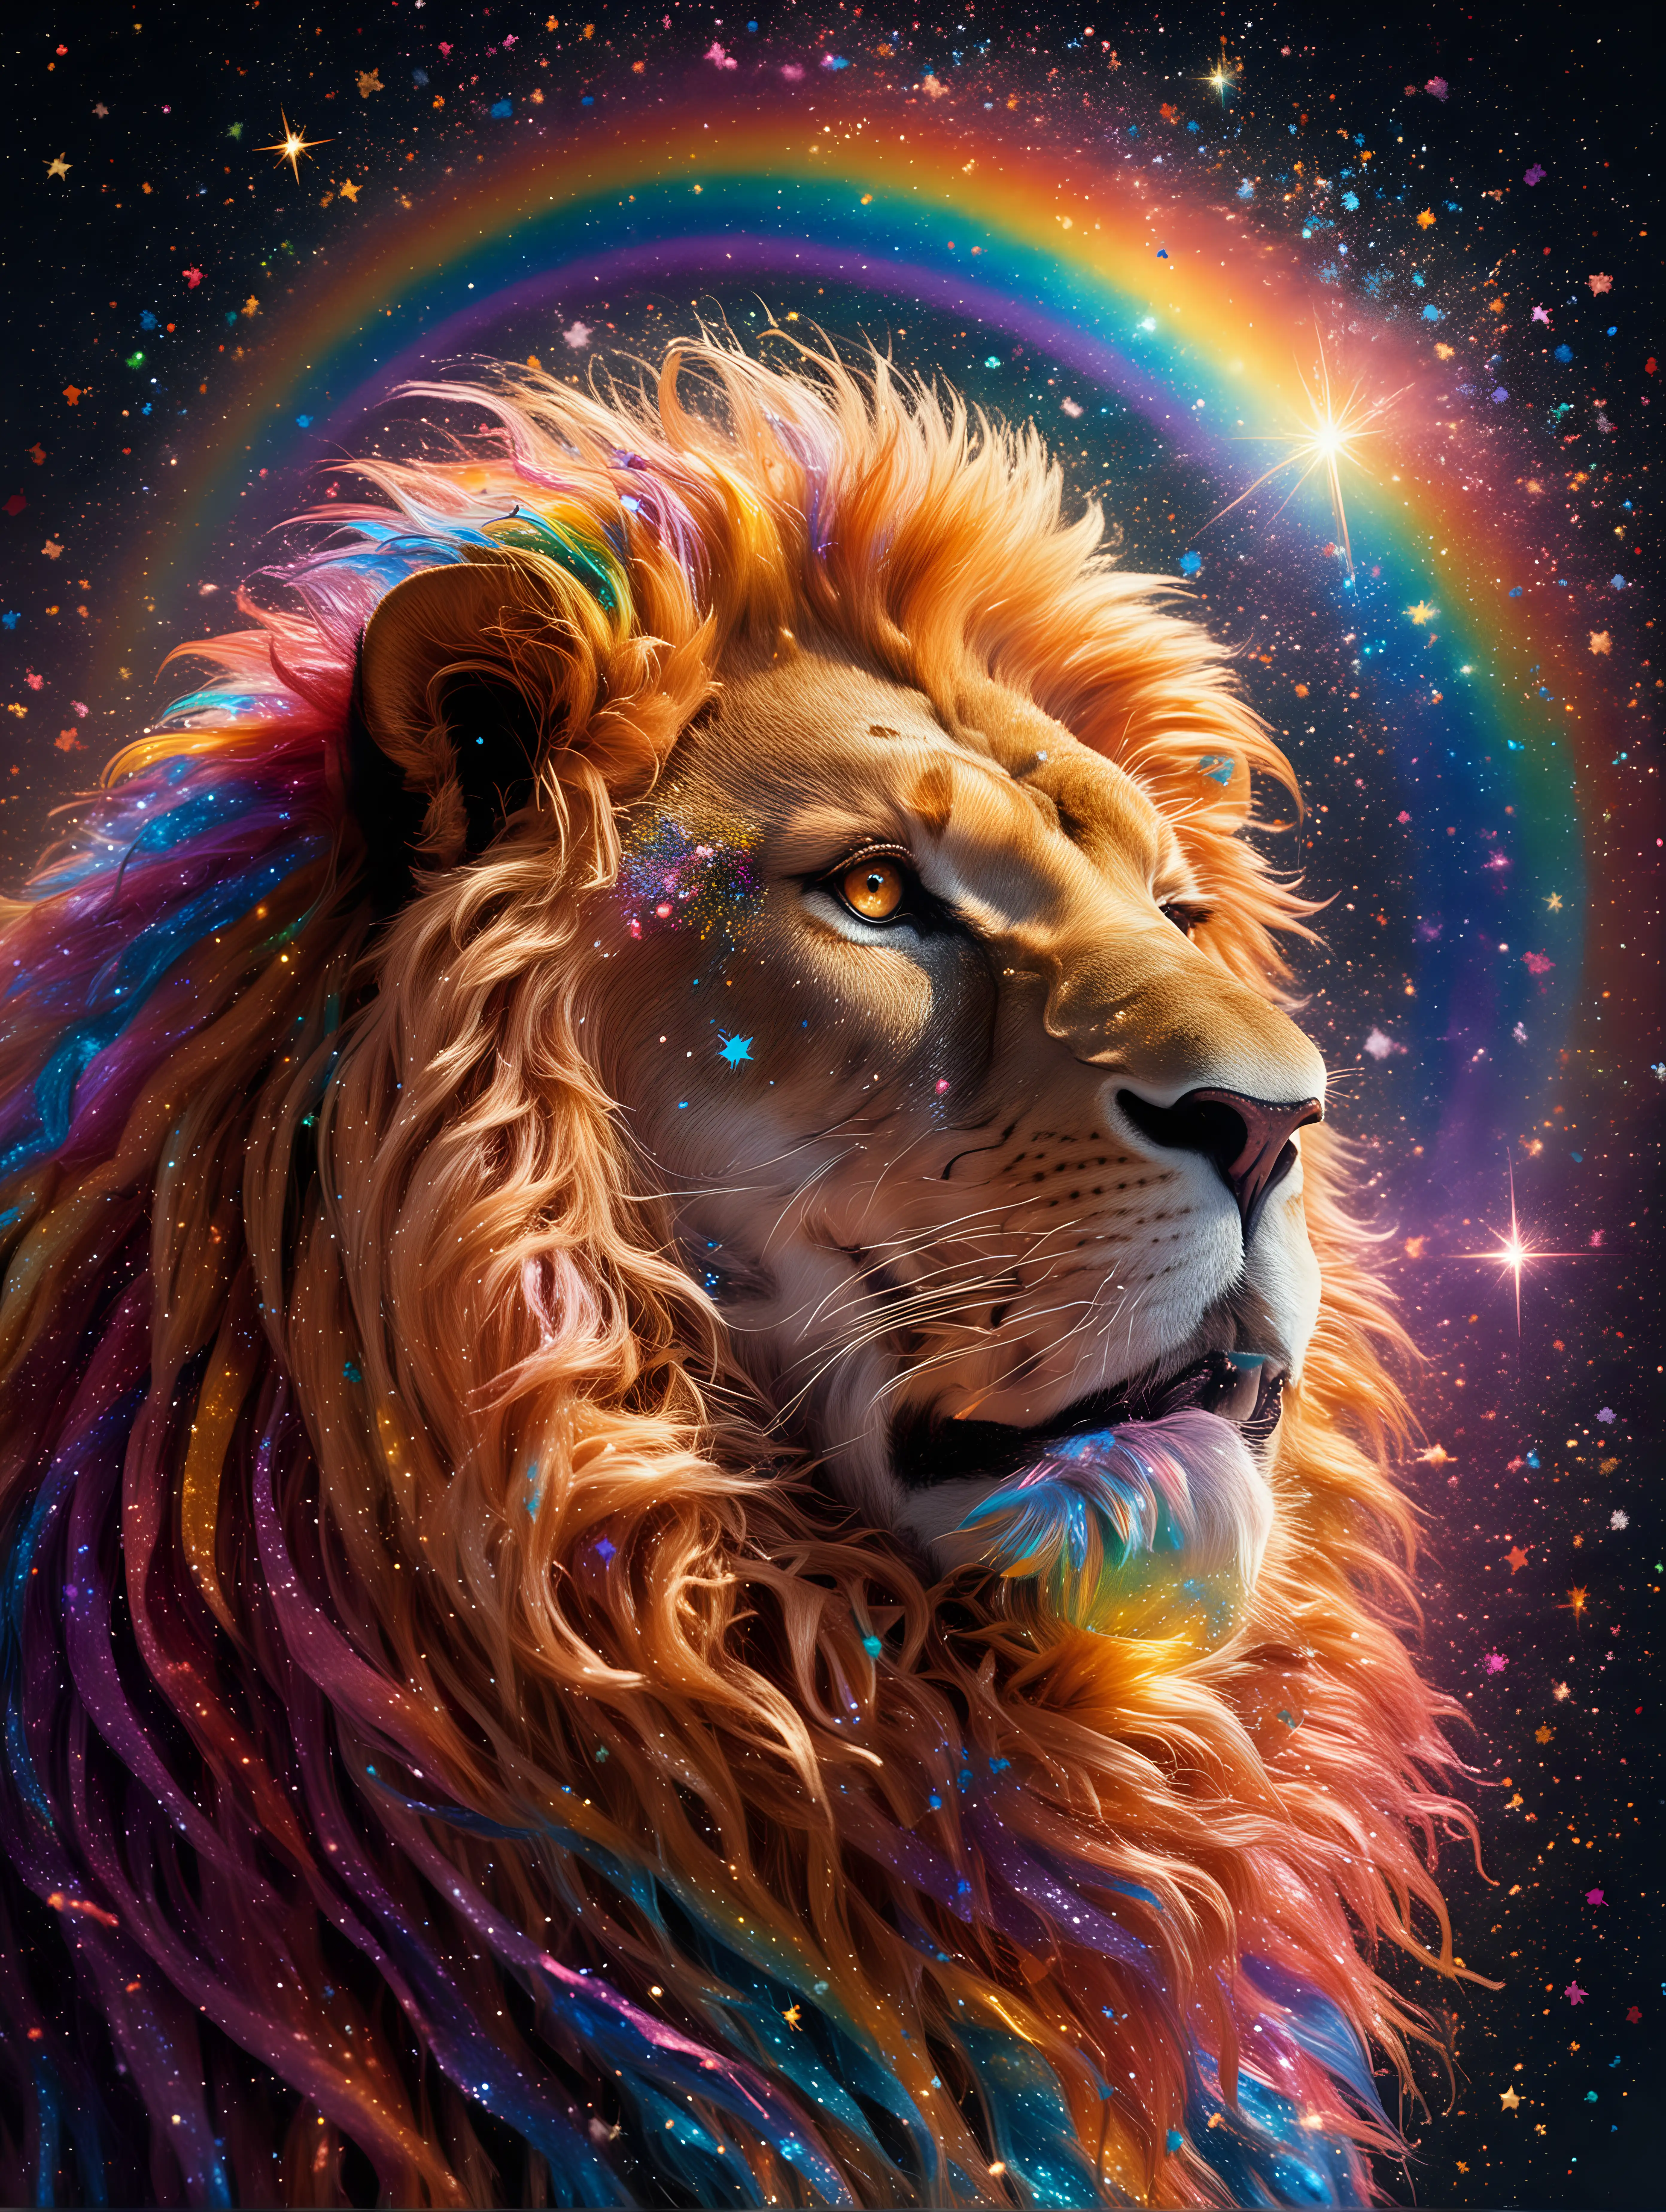 A Majestic, candy-like Rainbow Glitter and iridescent powder swirling picture of a lion with a star shining down behind him